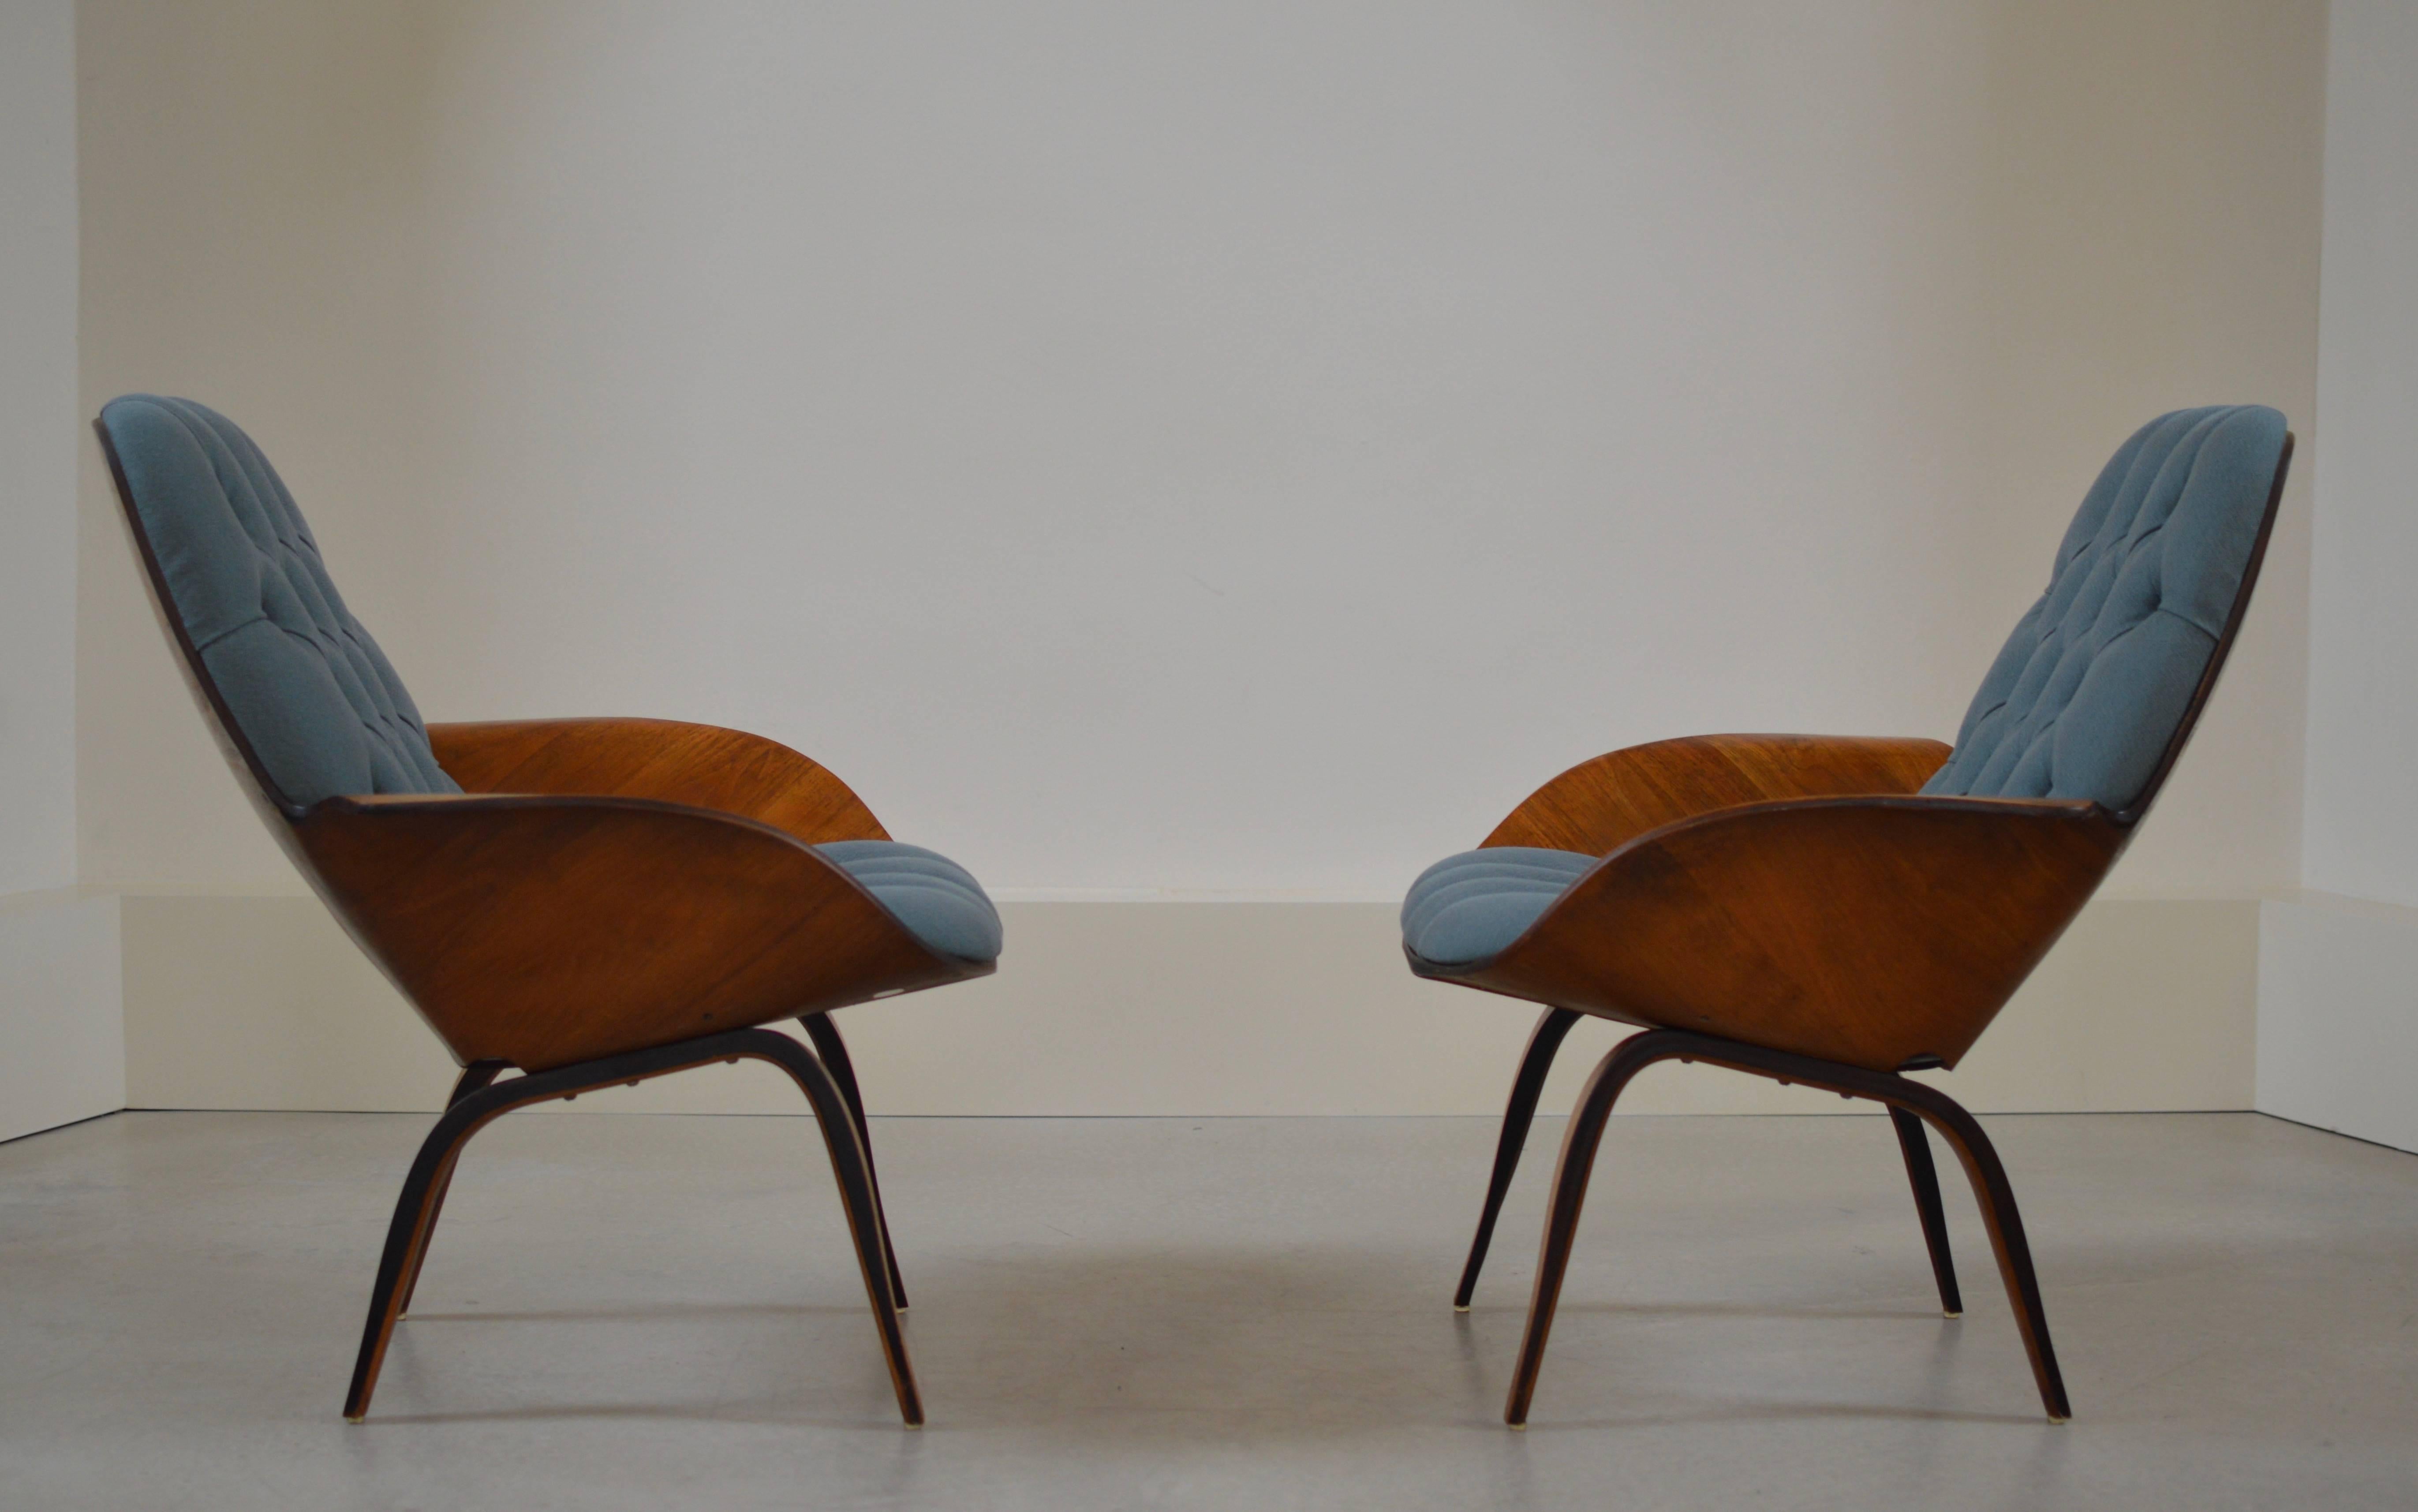 Pair of walnut bentwood/plywood lounge chairs by American designer George Mulhauser executed by Plycraft furniture according label to underside.
Chairs are fully restored and upholstered with green-blue cotton padded upholstery with buttons.